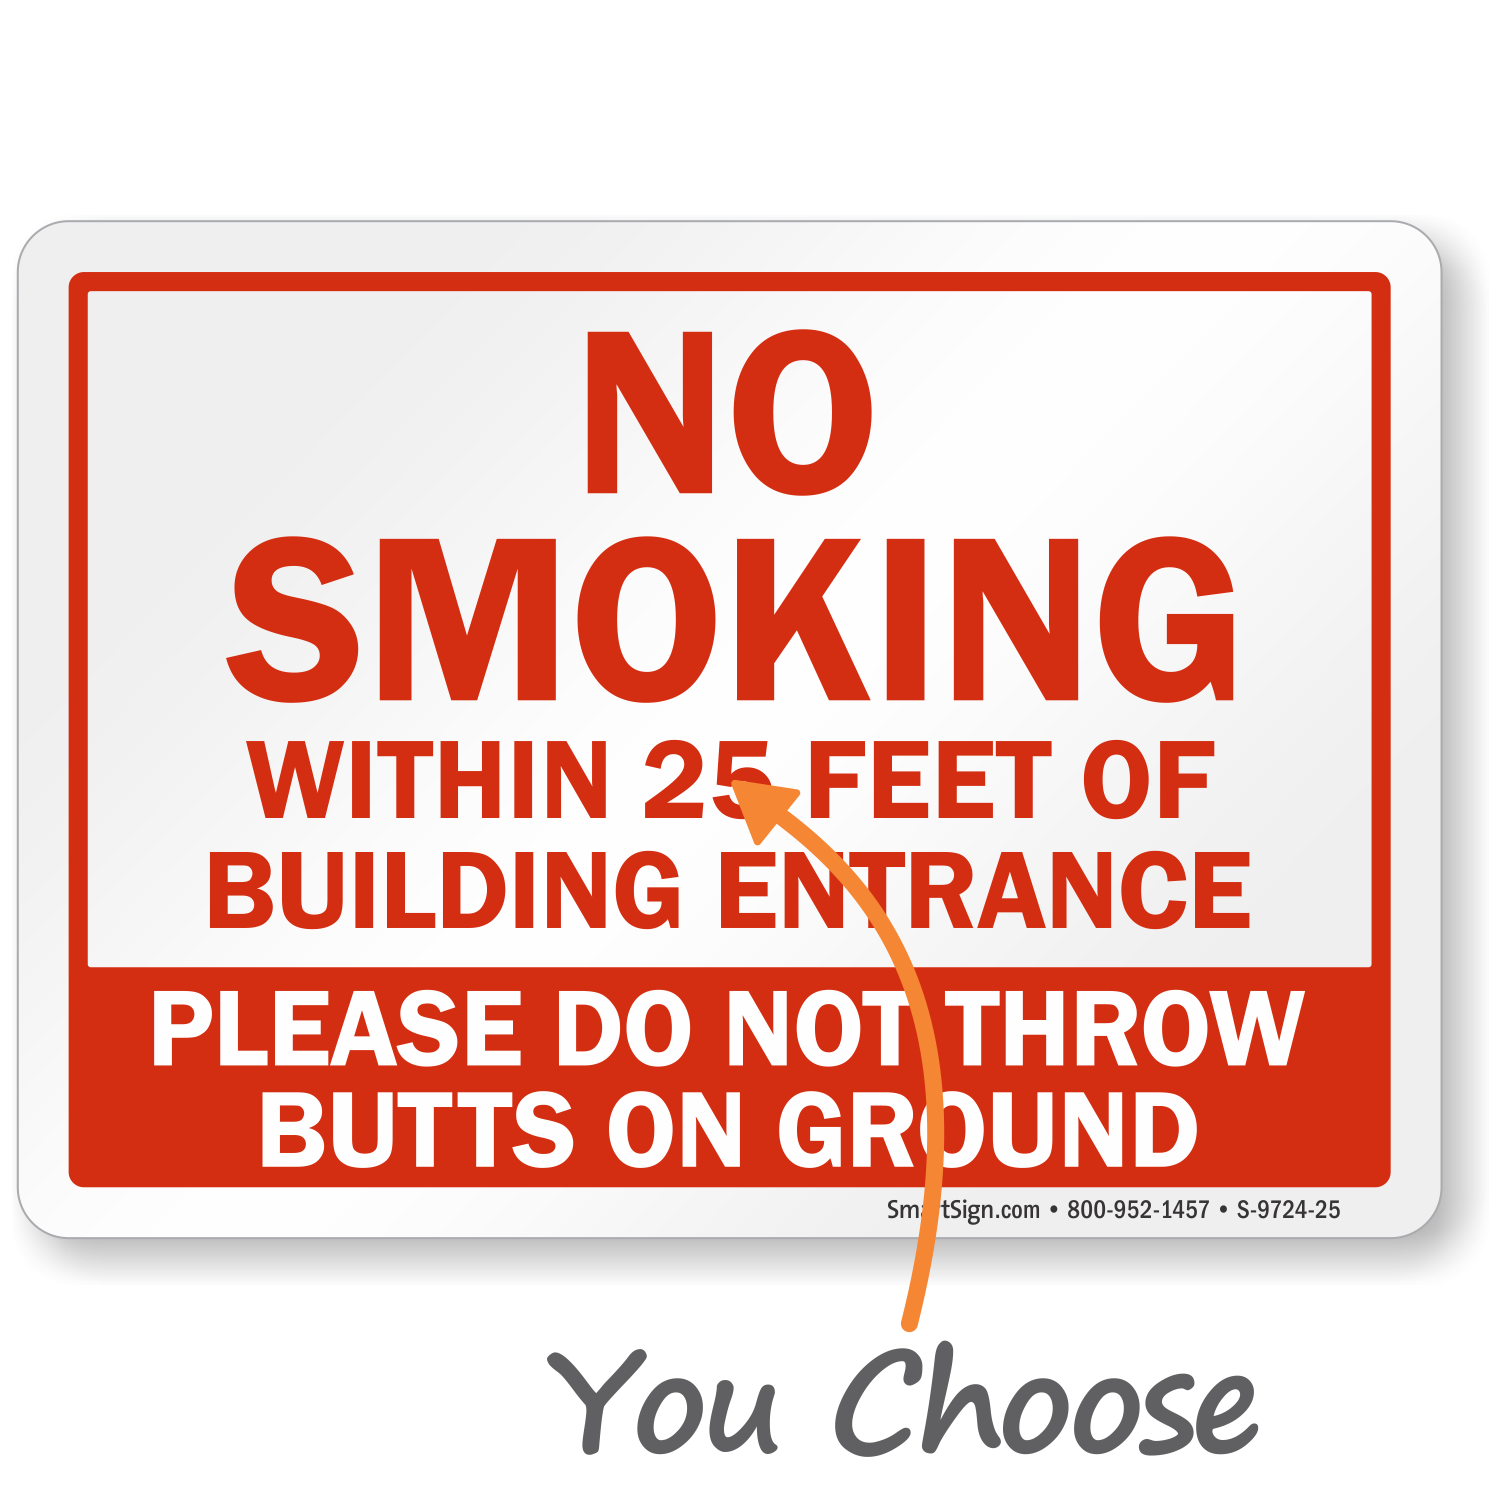 No Smoking Within 20 Feet Of Building Sign